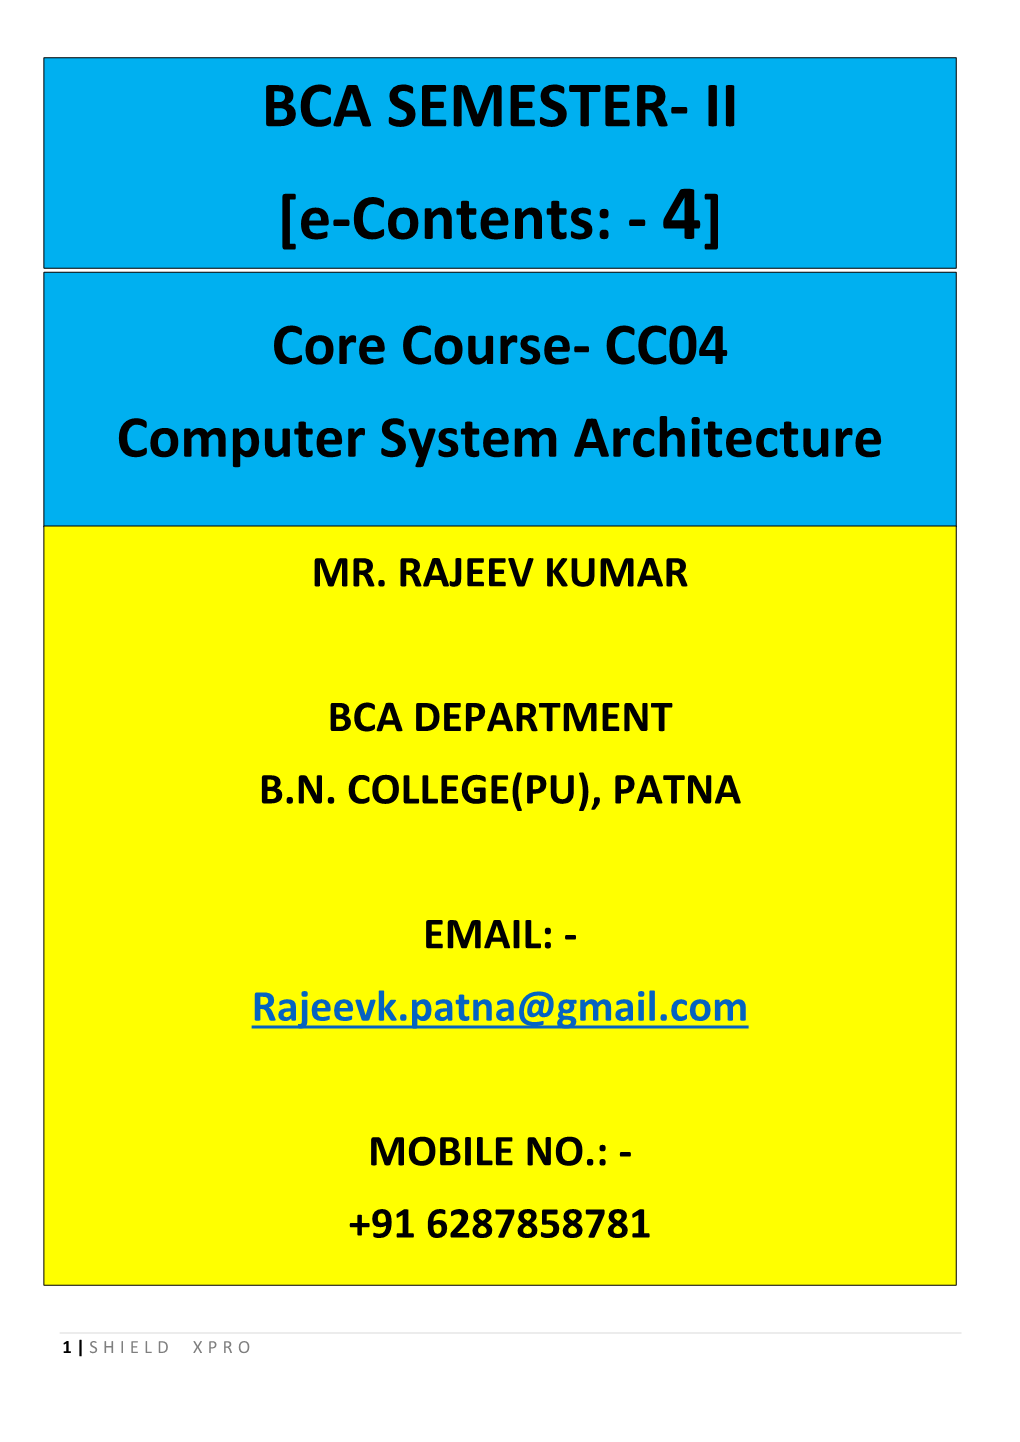 Computer System Architecture by Rajeev Kumar